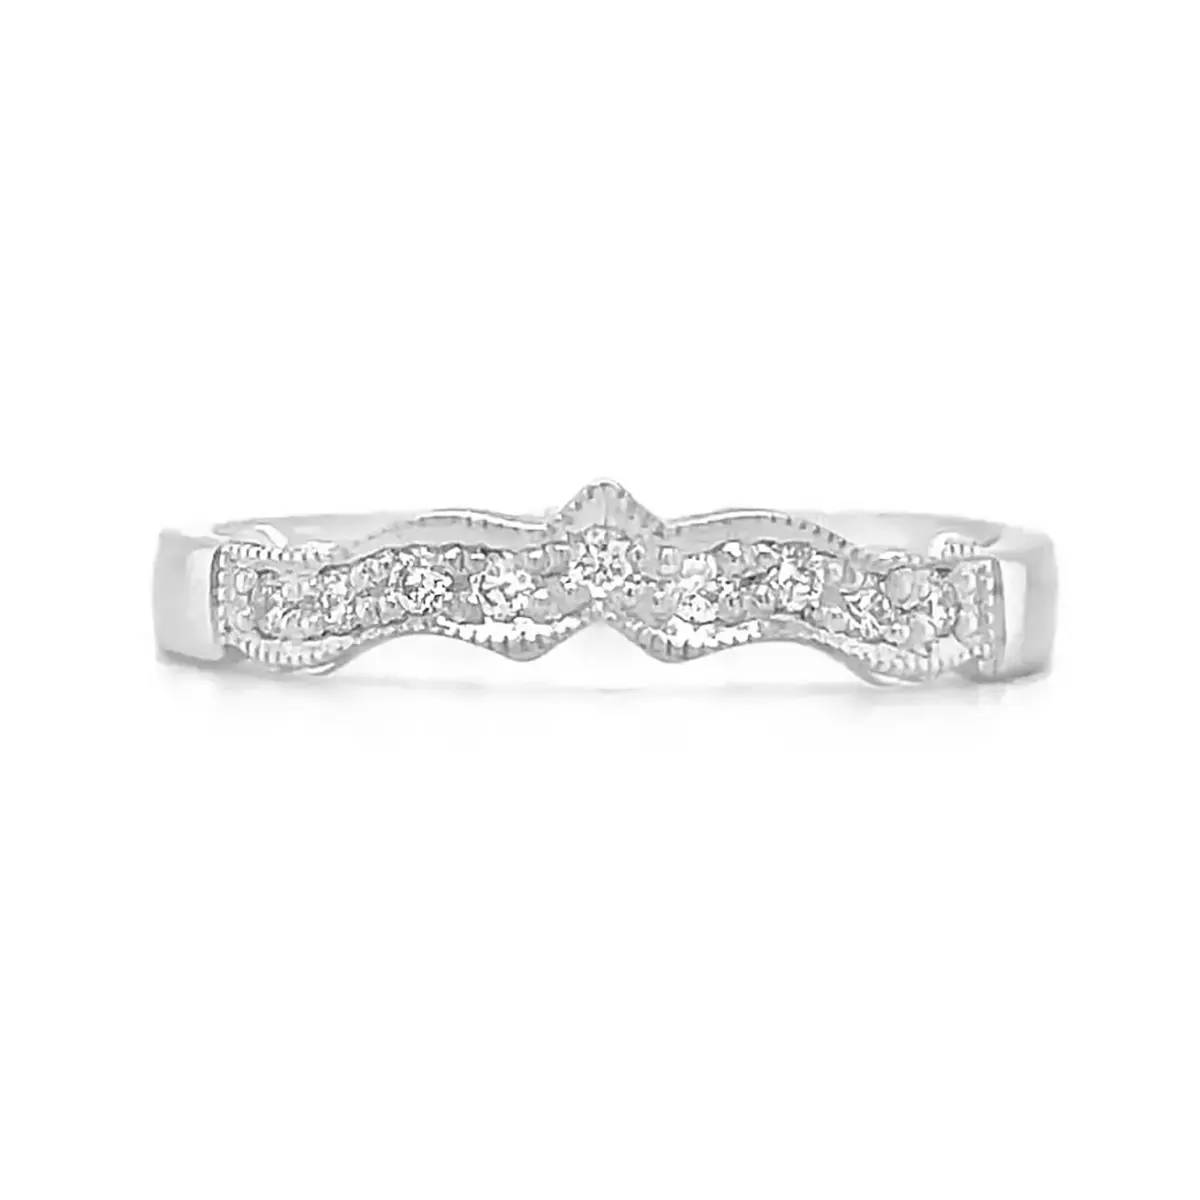 1_claddagh Diamond And White Gold Wedding Ring